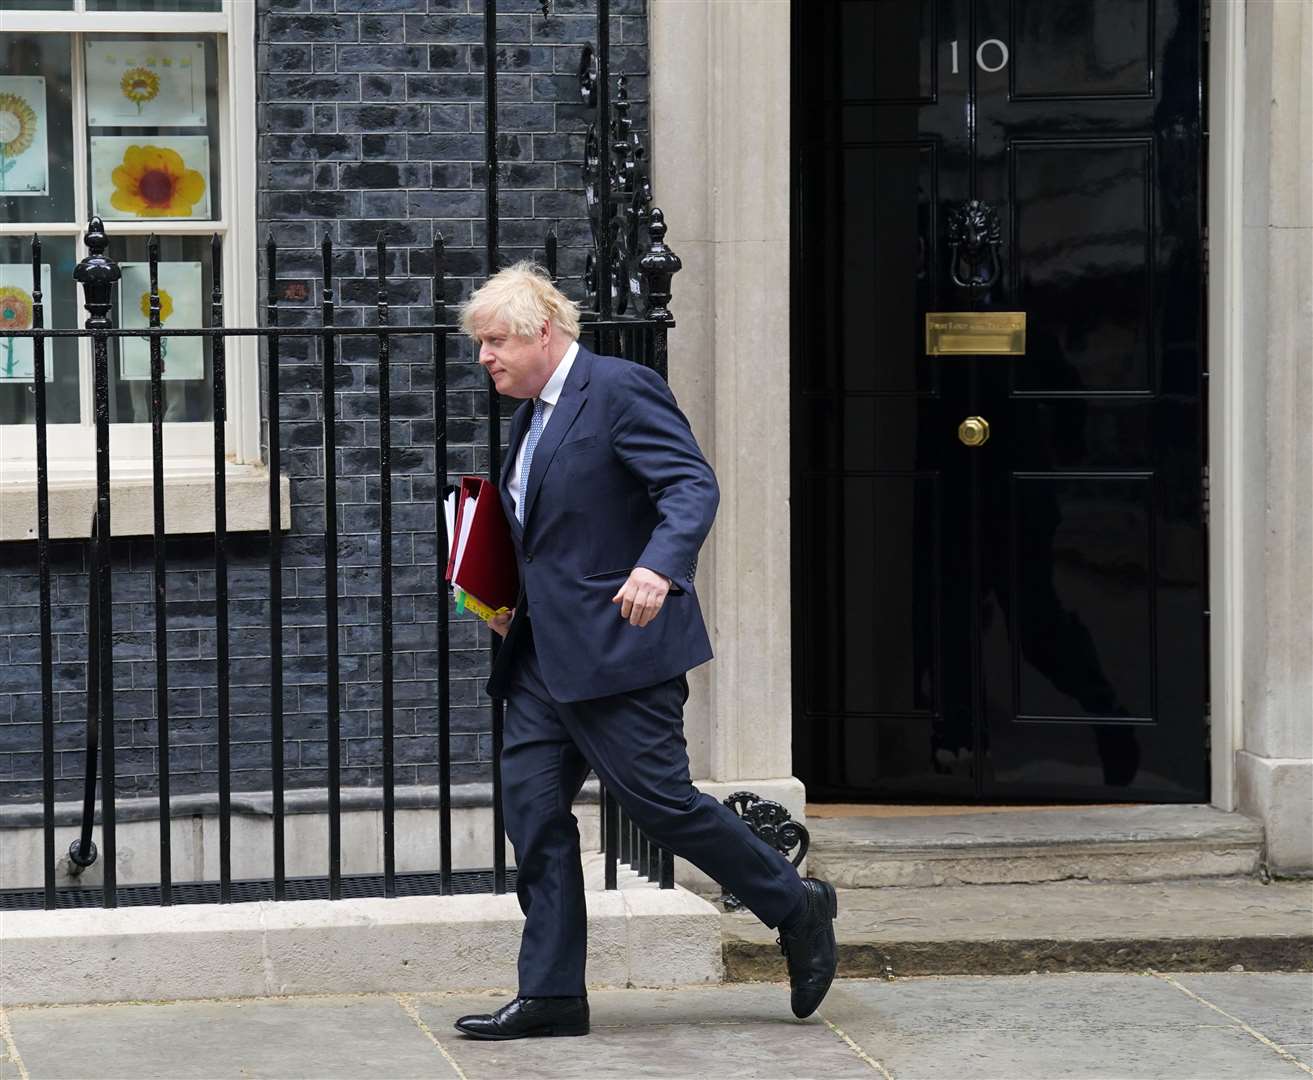 Boris Johnson departs 10 Downing Street to attend Prime Minister’s Questions at the Houses of Parliament on Wednesday (Stefan Rousseau/PA)